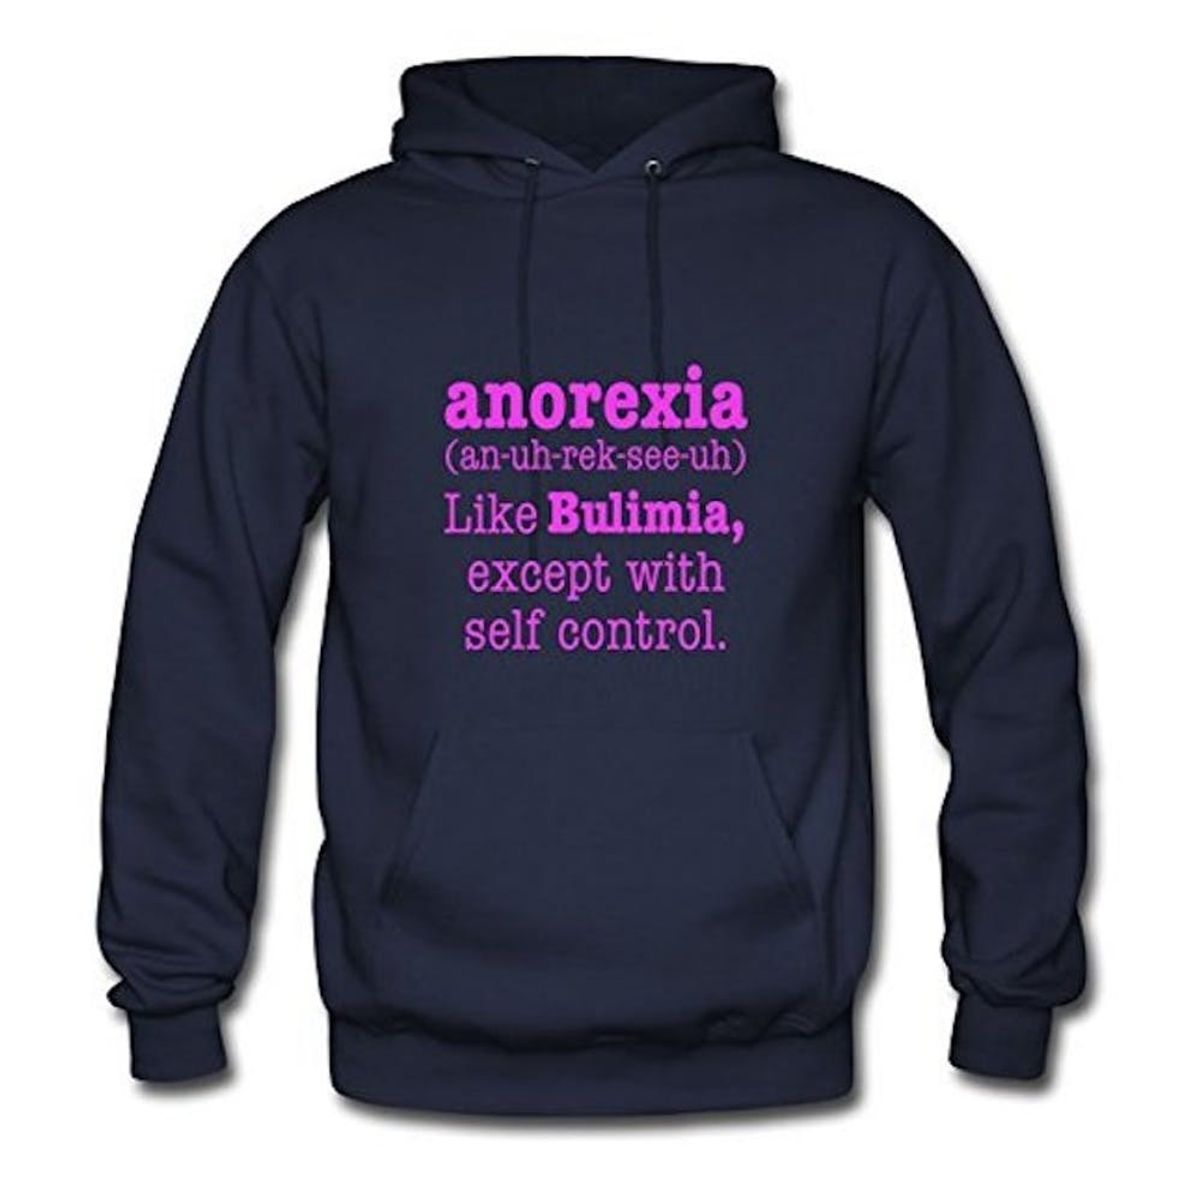 Amazon Is Selling an “Anorexia” Hoodie and People Are Really Upset